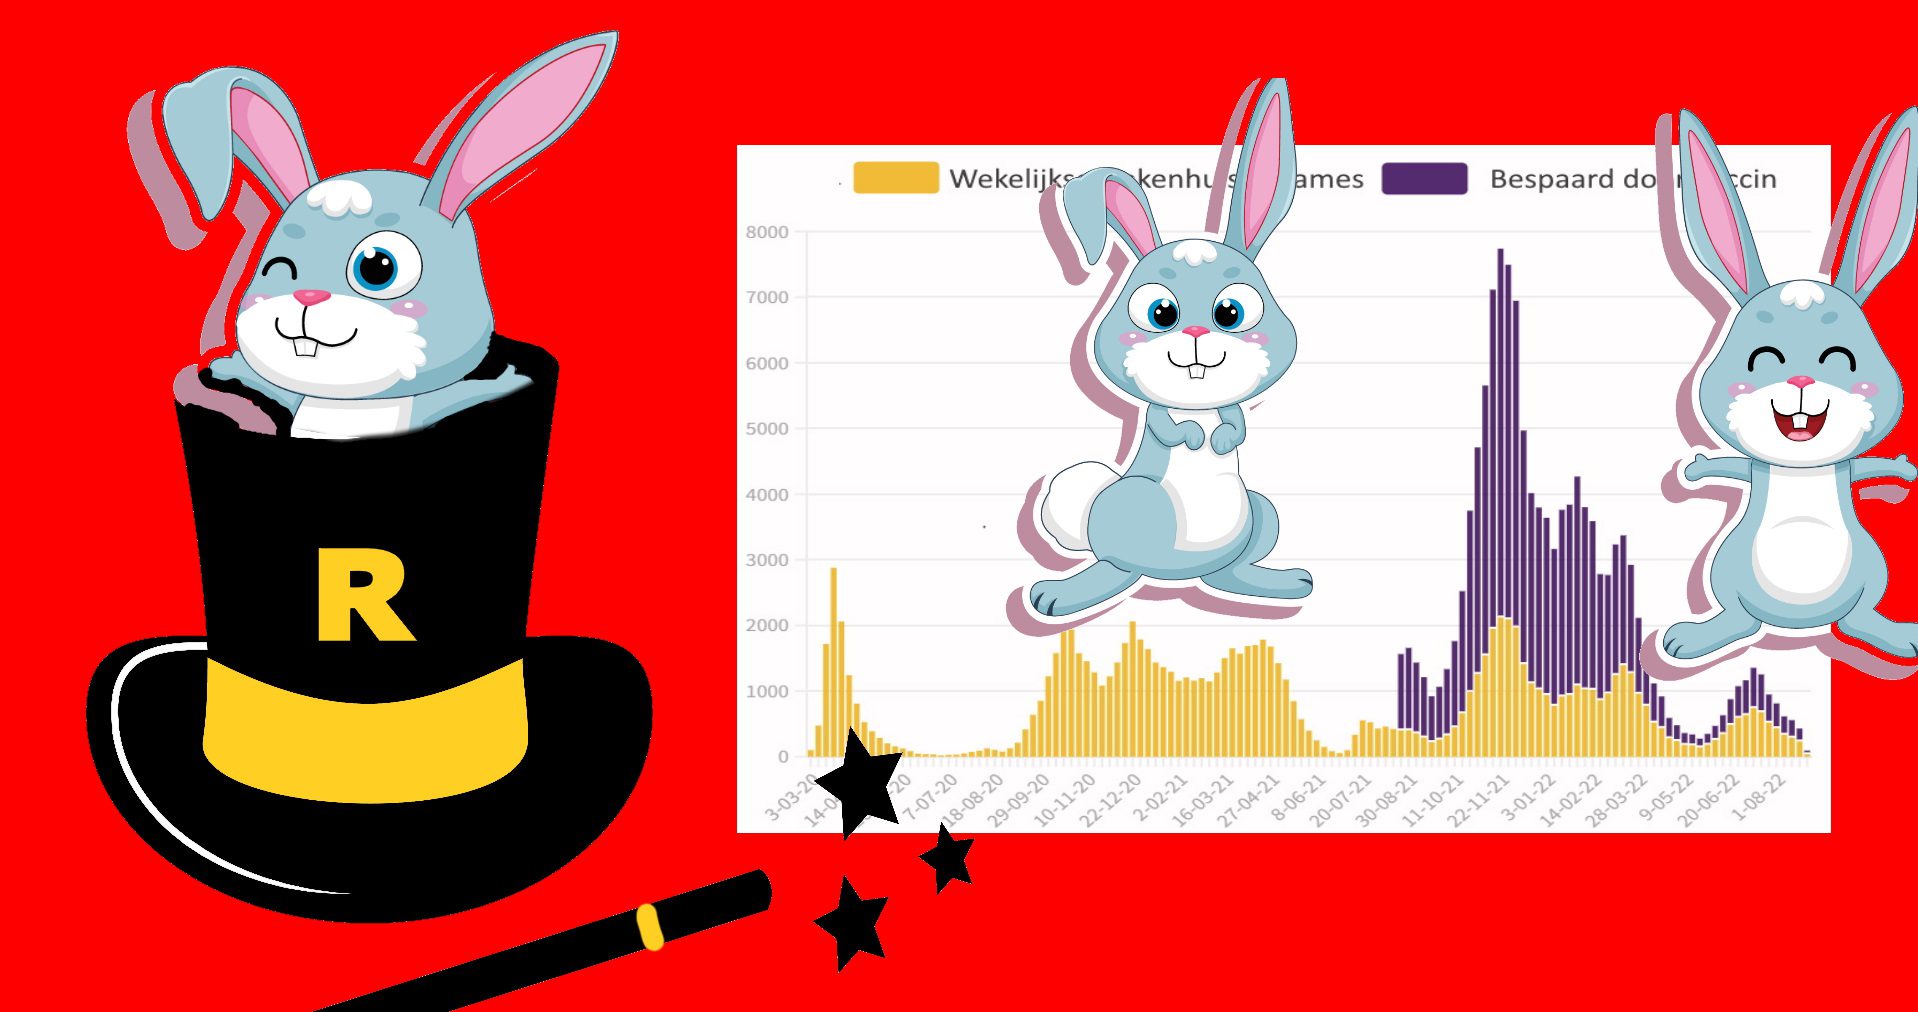 Another data rabbit from Top Hat by RIVM